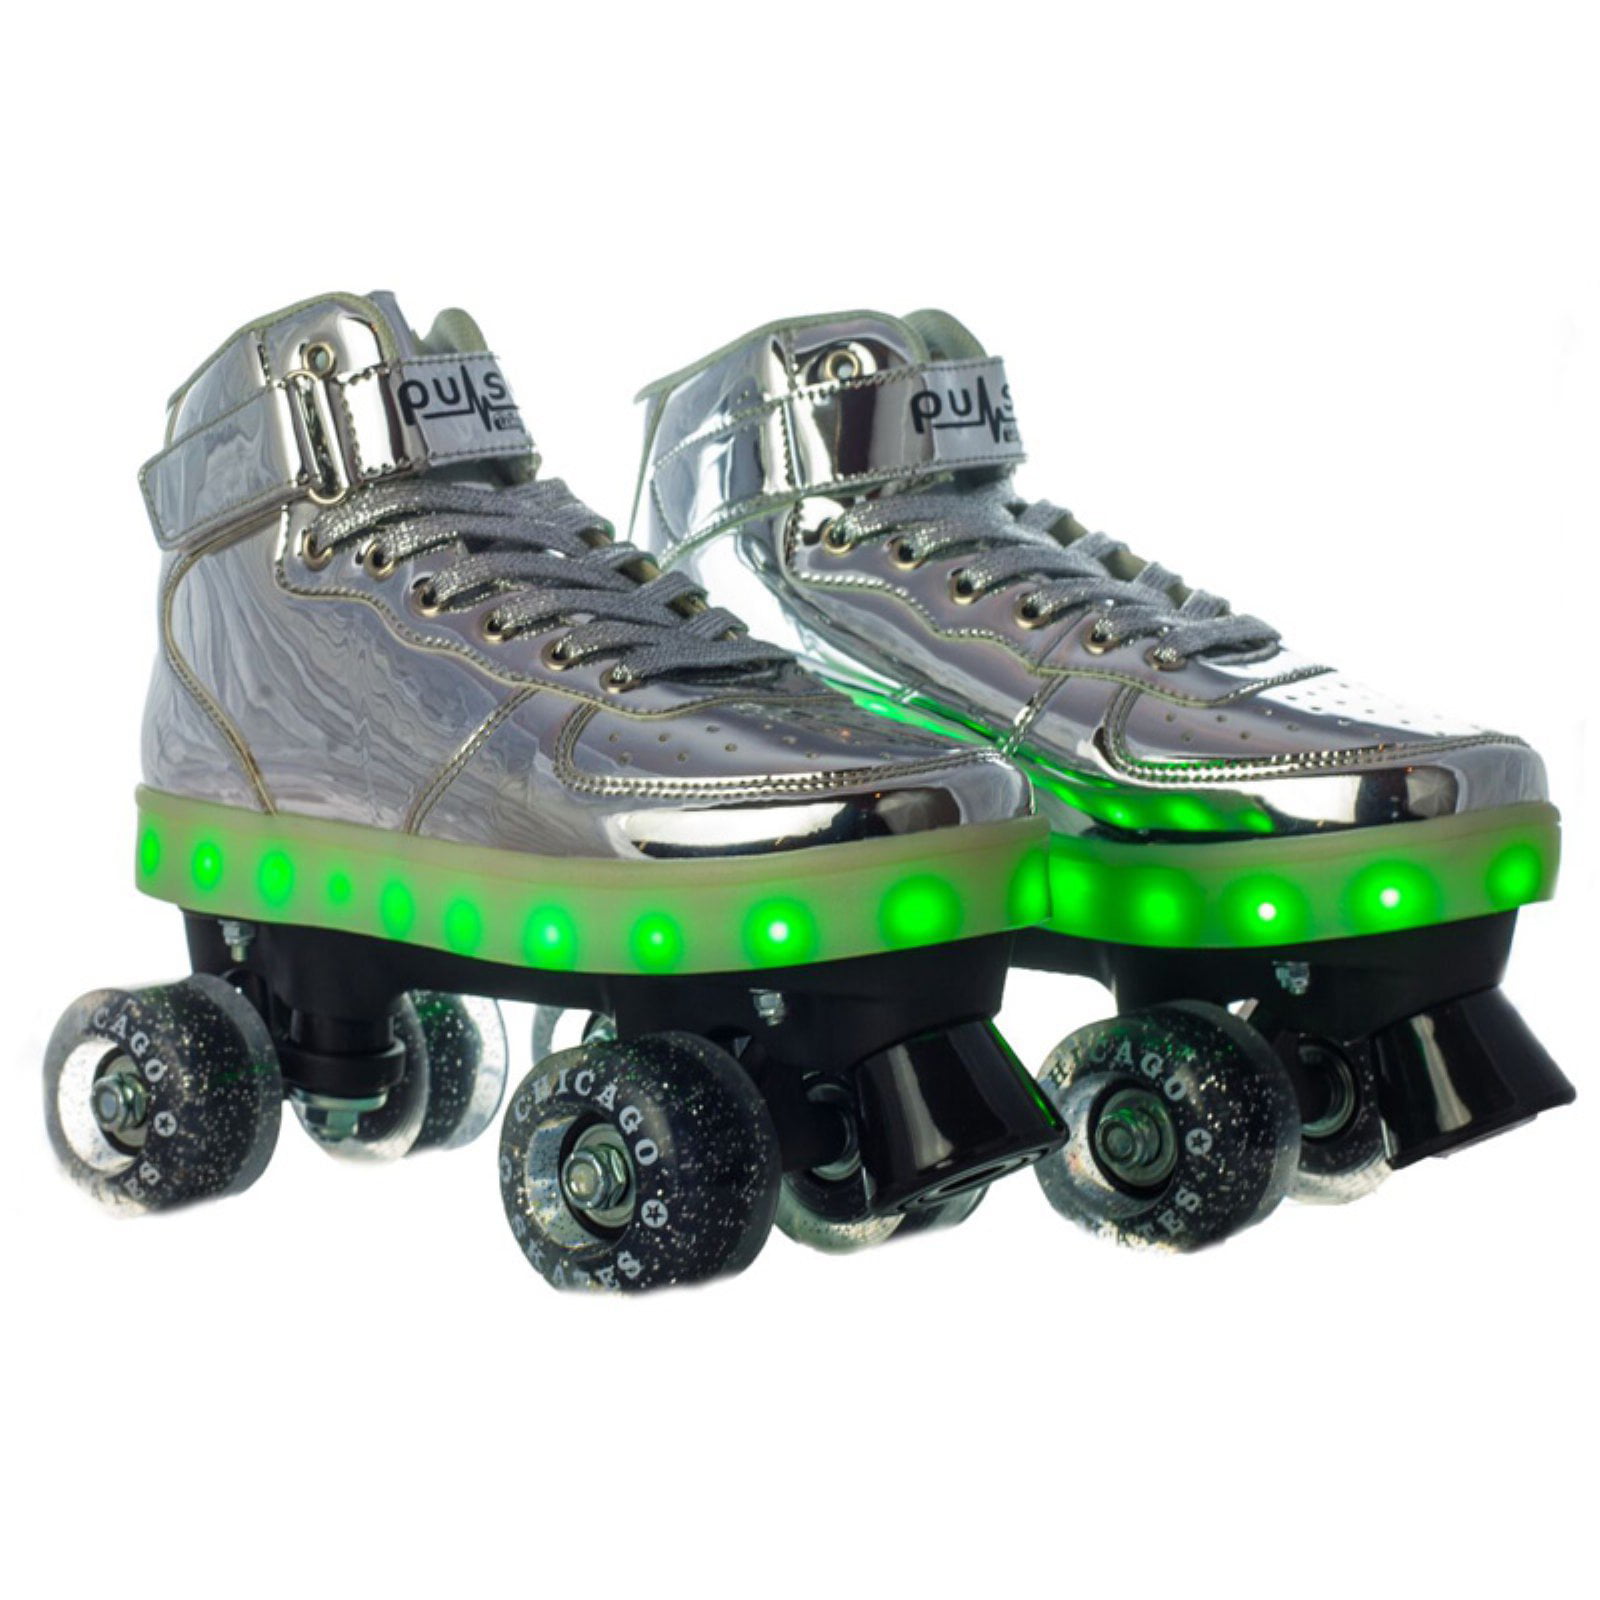 Premium PU Leather High-top Four-Wheel Roller Skates Rechargeable Shiny Roller Skates for Unisex Youth Adults Roller Skates Classic Roller Skates